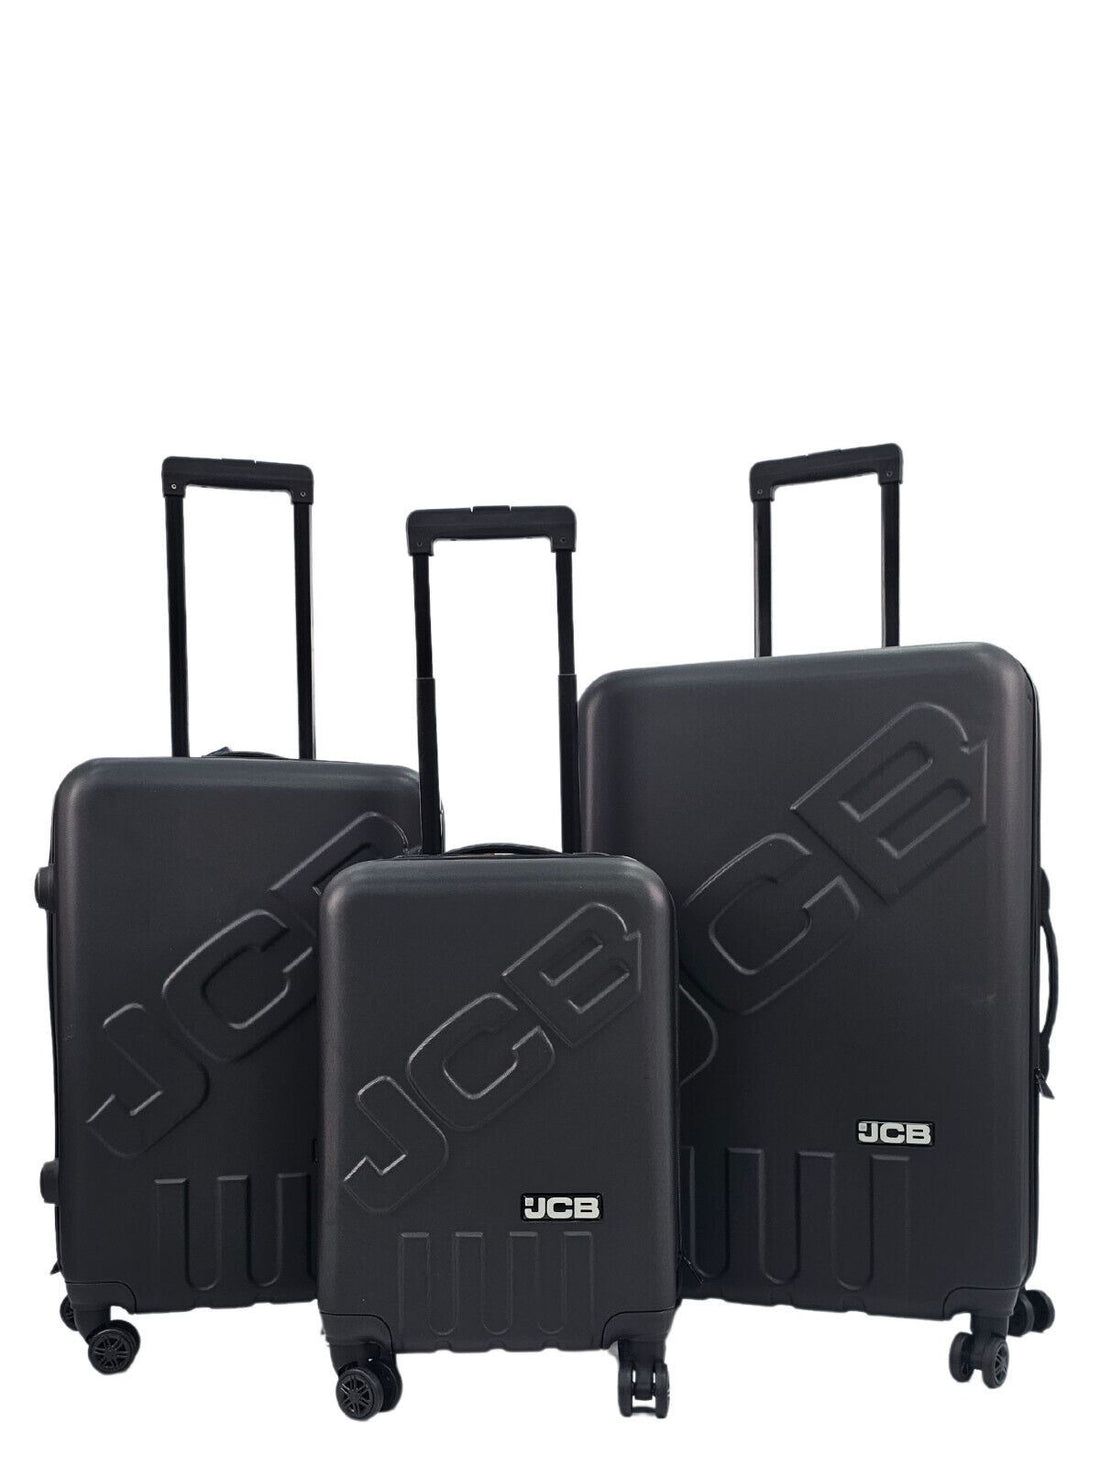 Black Hard Shell Suitcase Set Luggage Travel Trolley Cabin Cases Lightweight Bag